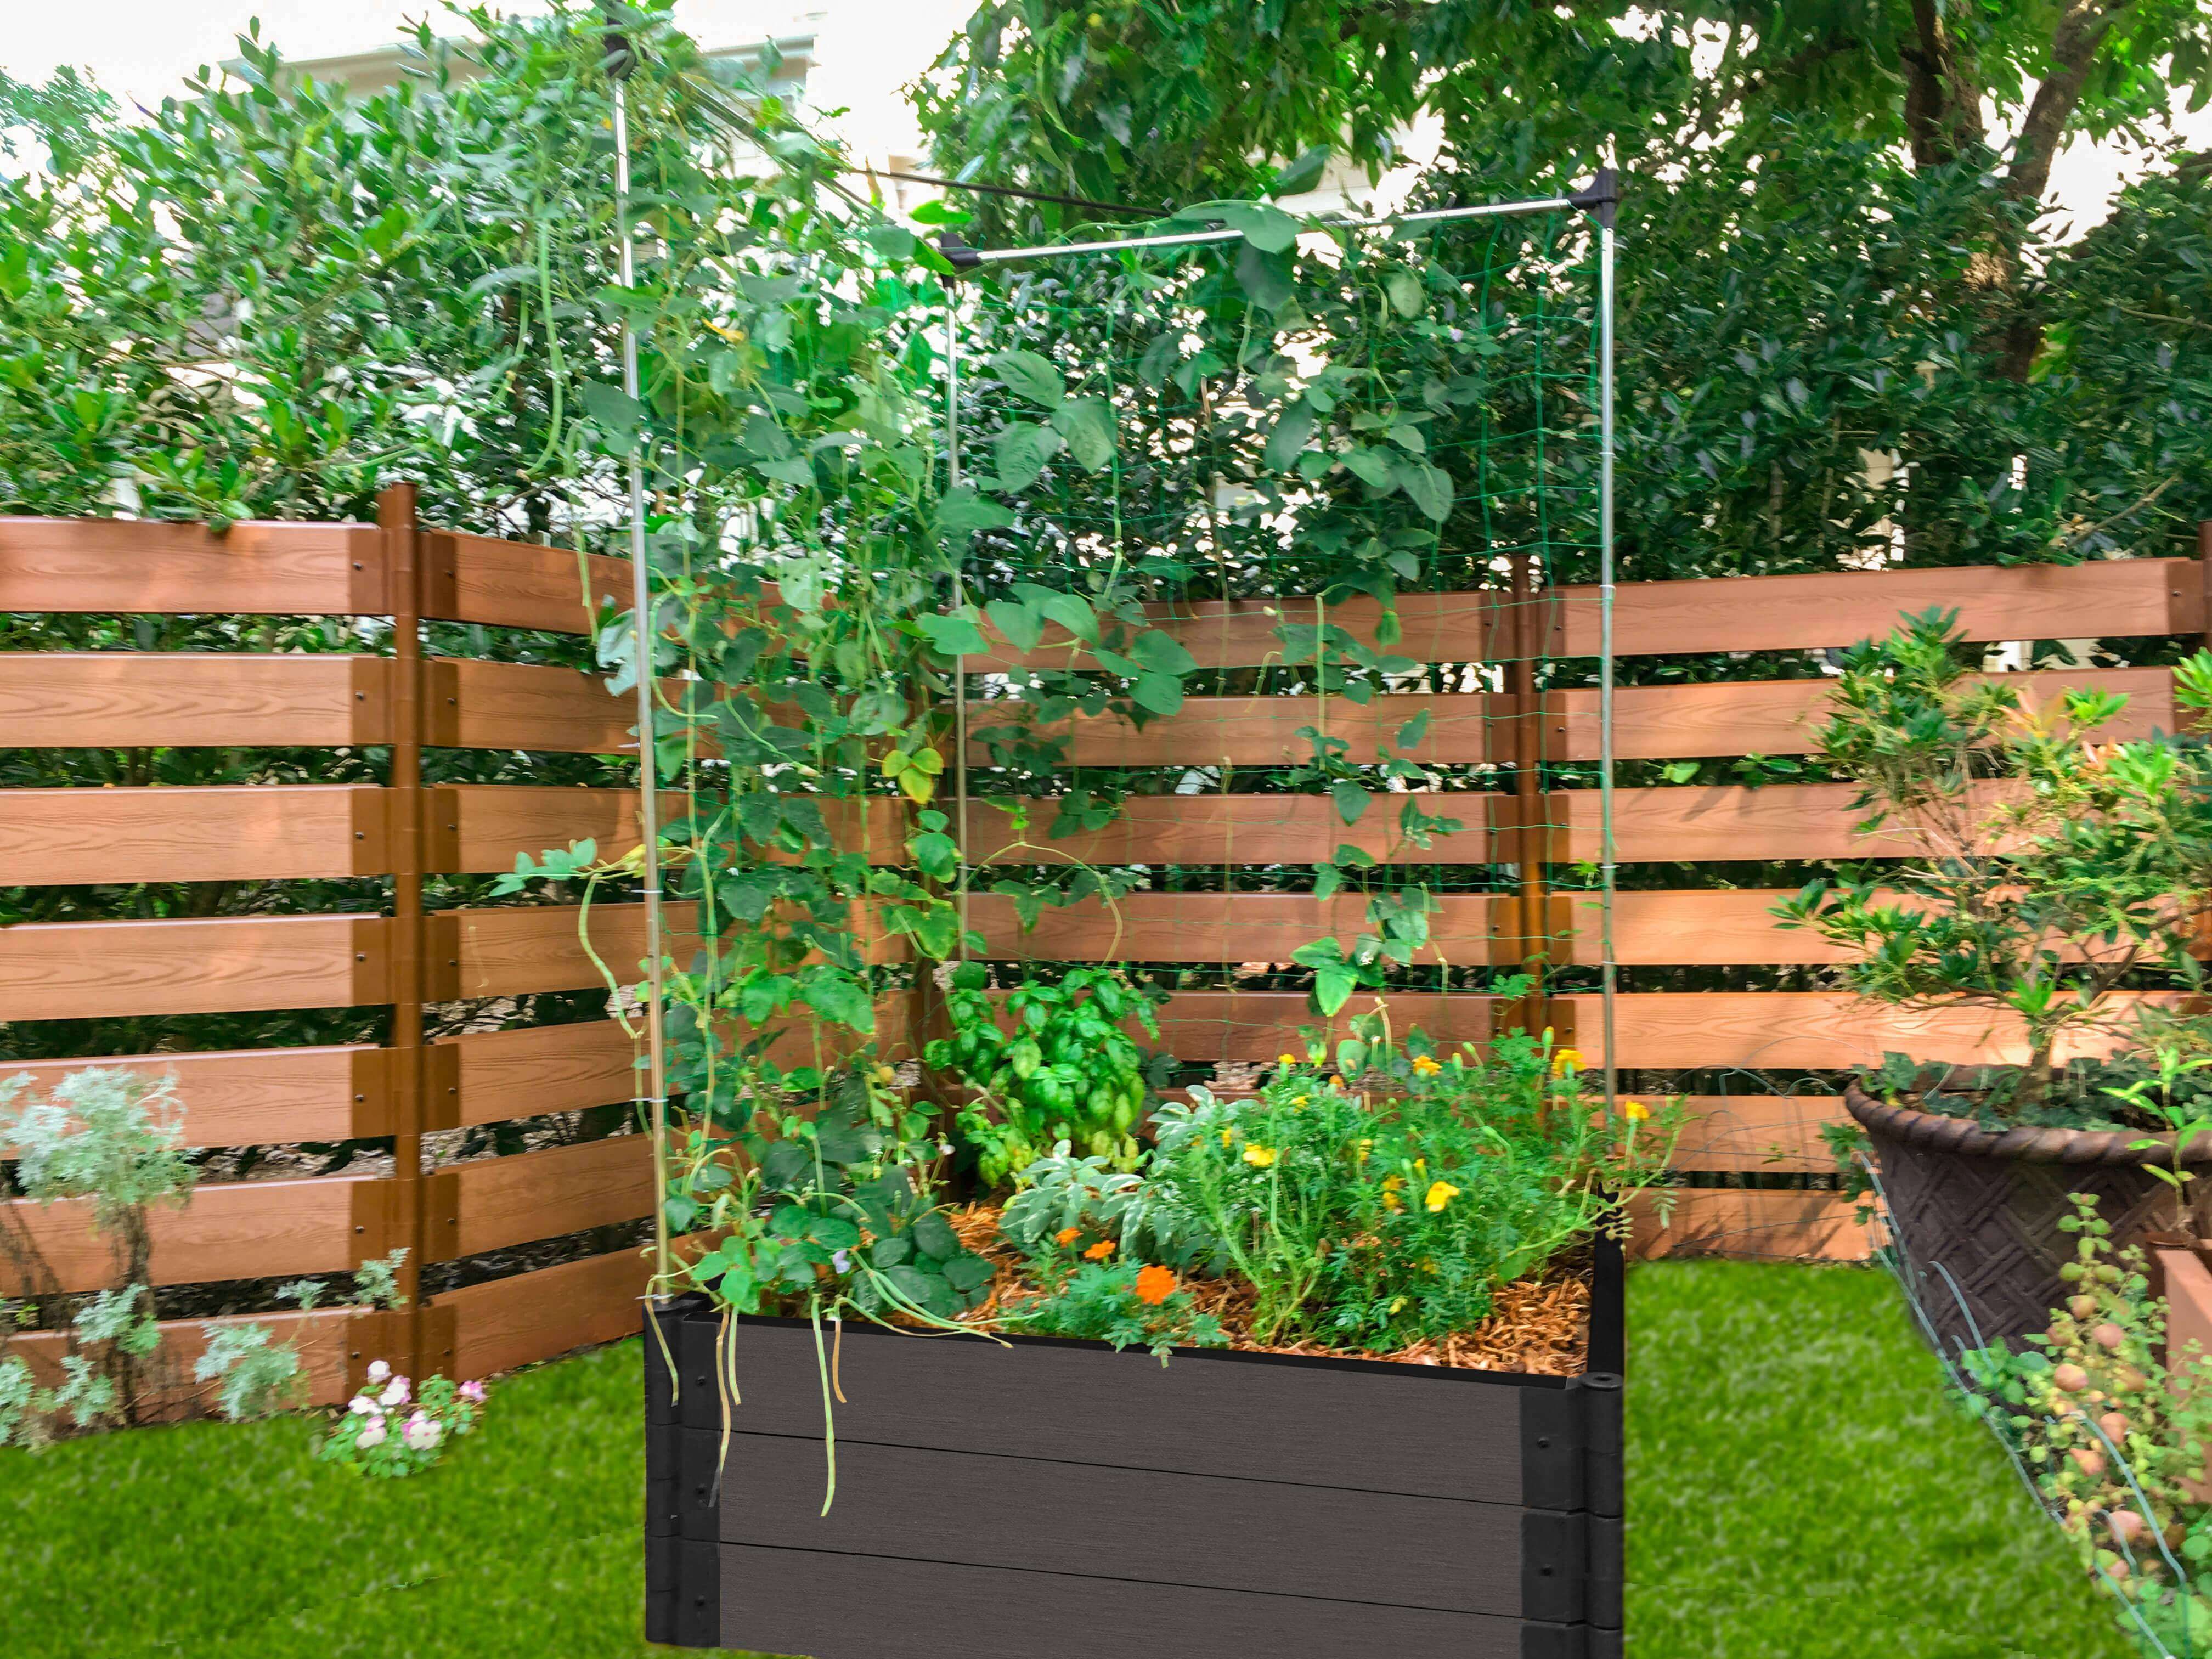 4' x 4' Raised Garden Bed with Trellis Raised Garden Beds Frame It All Weathered Wood 1